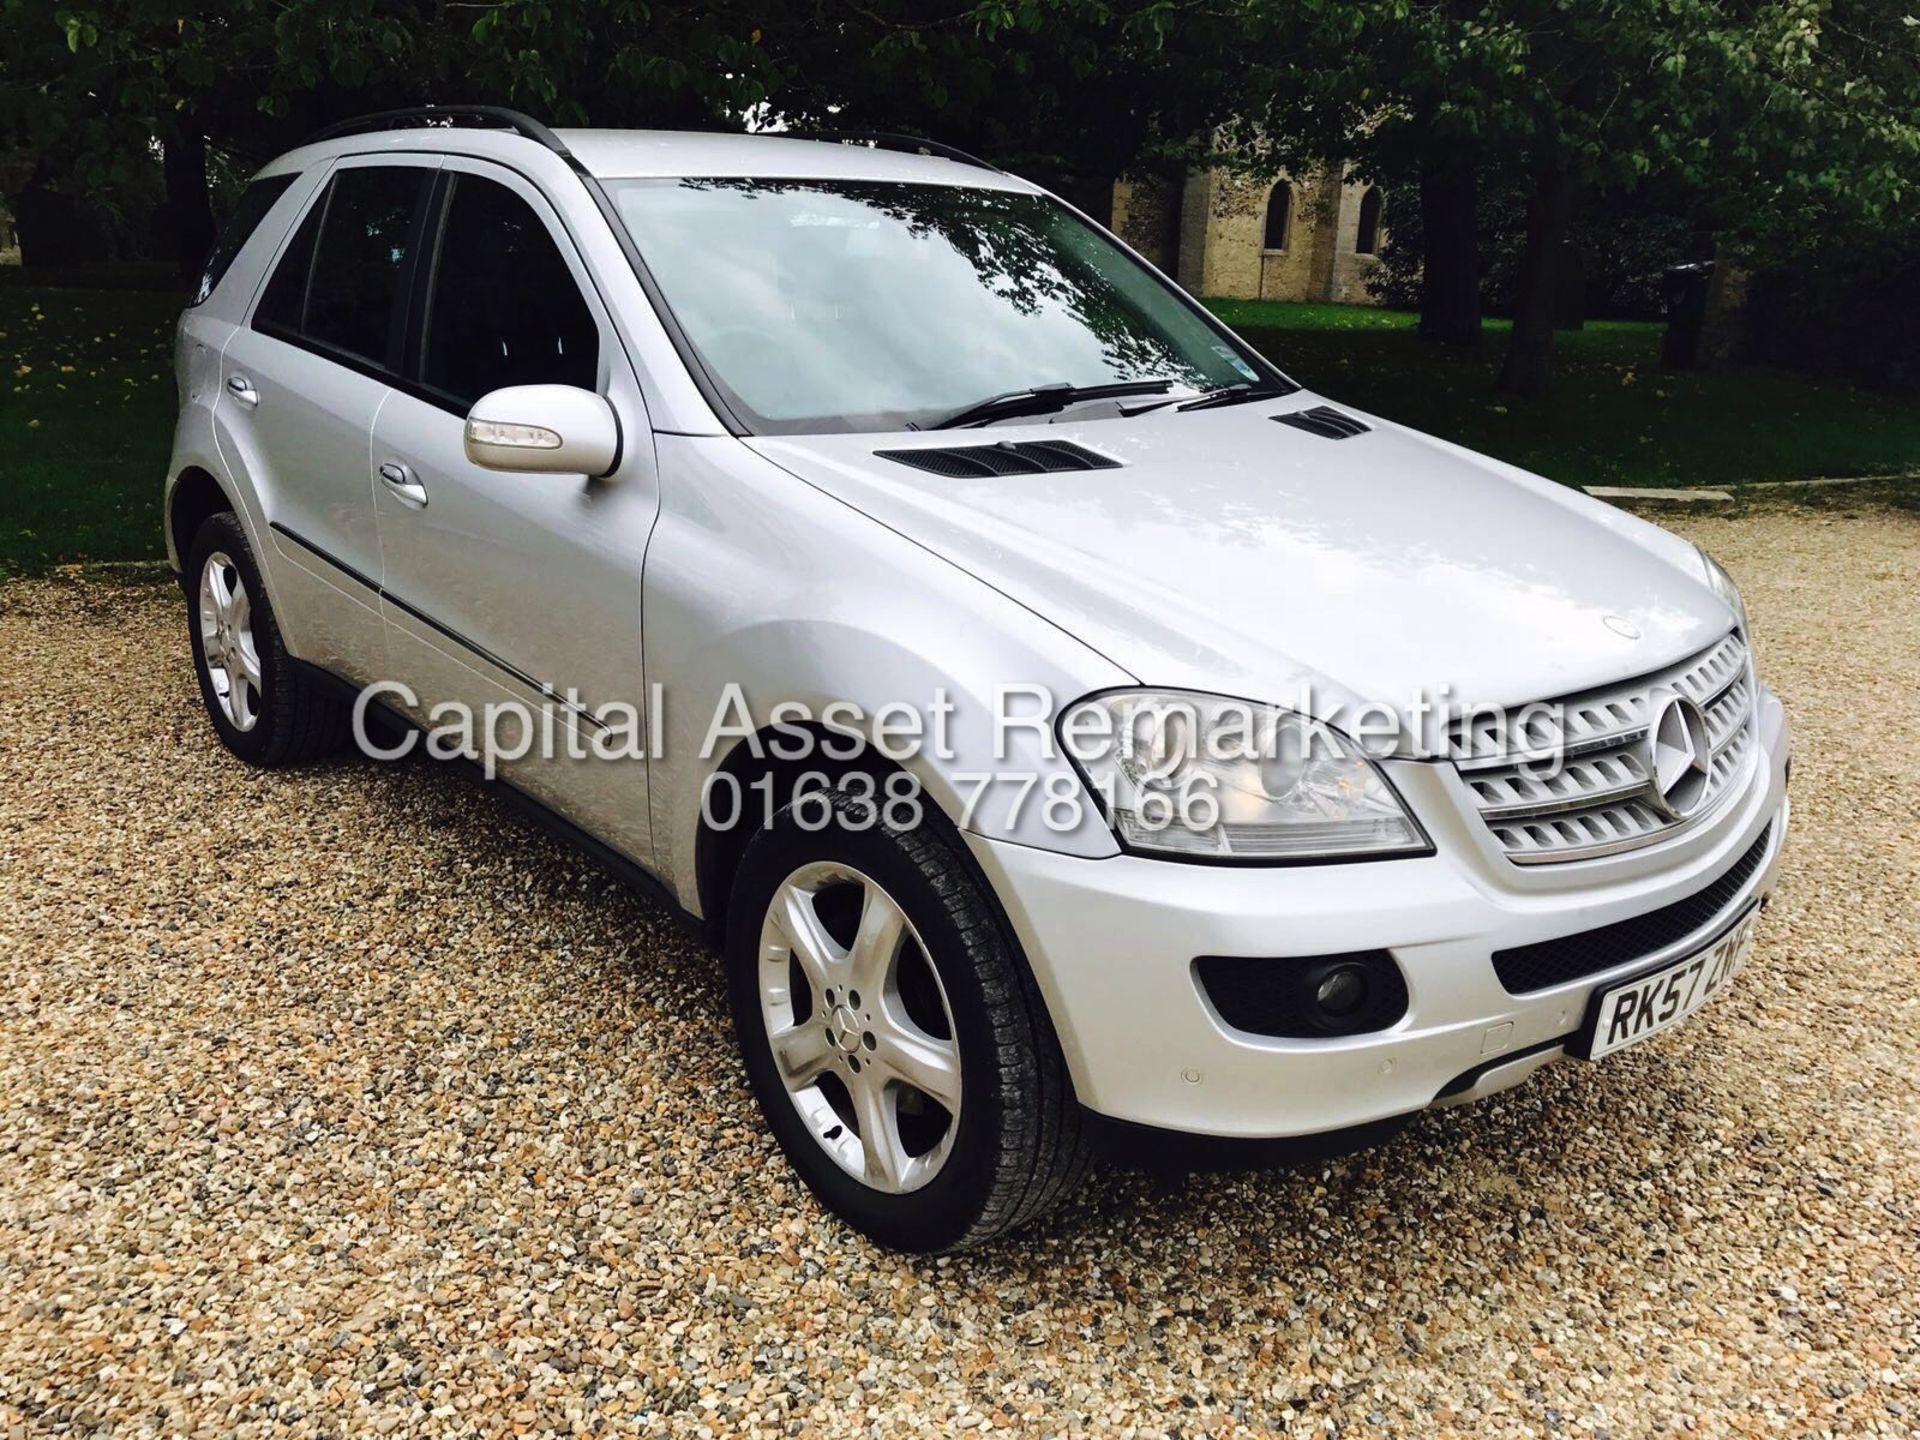 MERCEDES ML280CDI "EDITION S" AUTO 4MATIC (2008MODEL) 1 PREVIOUS OWNER FSH (NO VAT TO PAY ON HAMMER) - Image 3 of 16